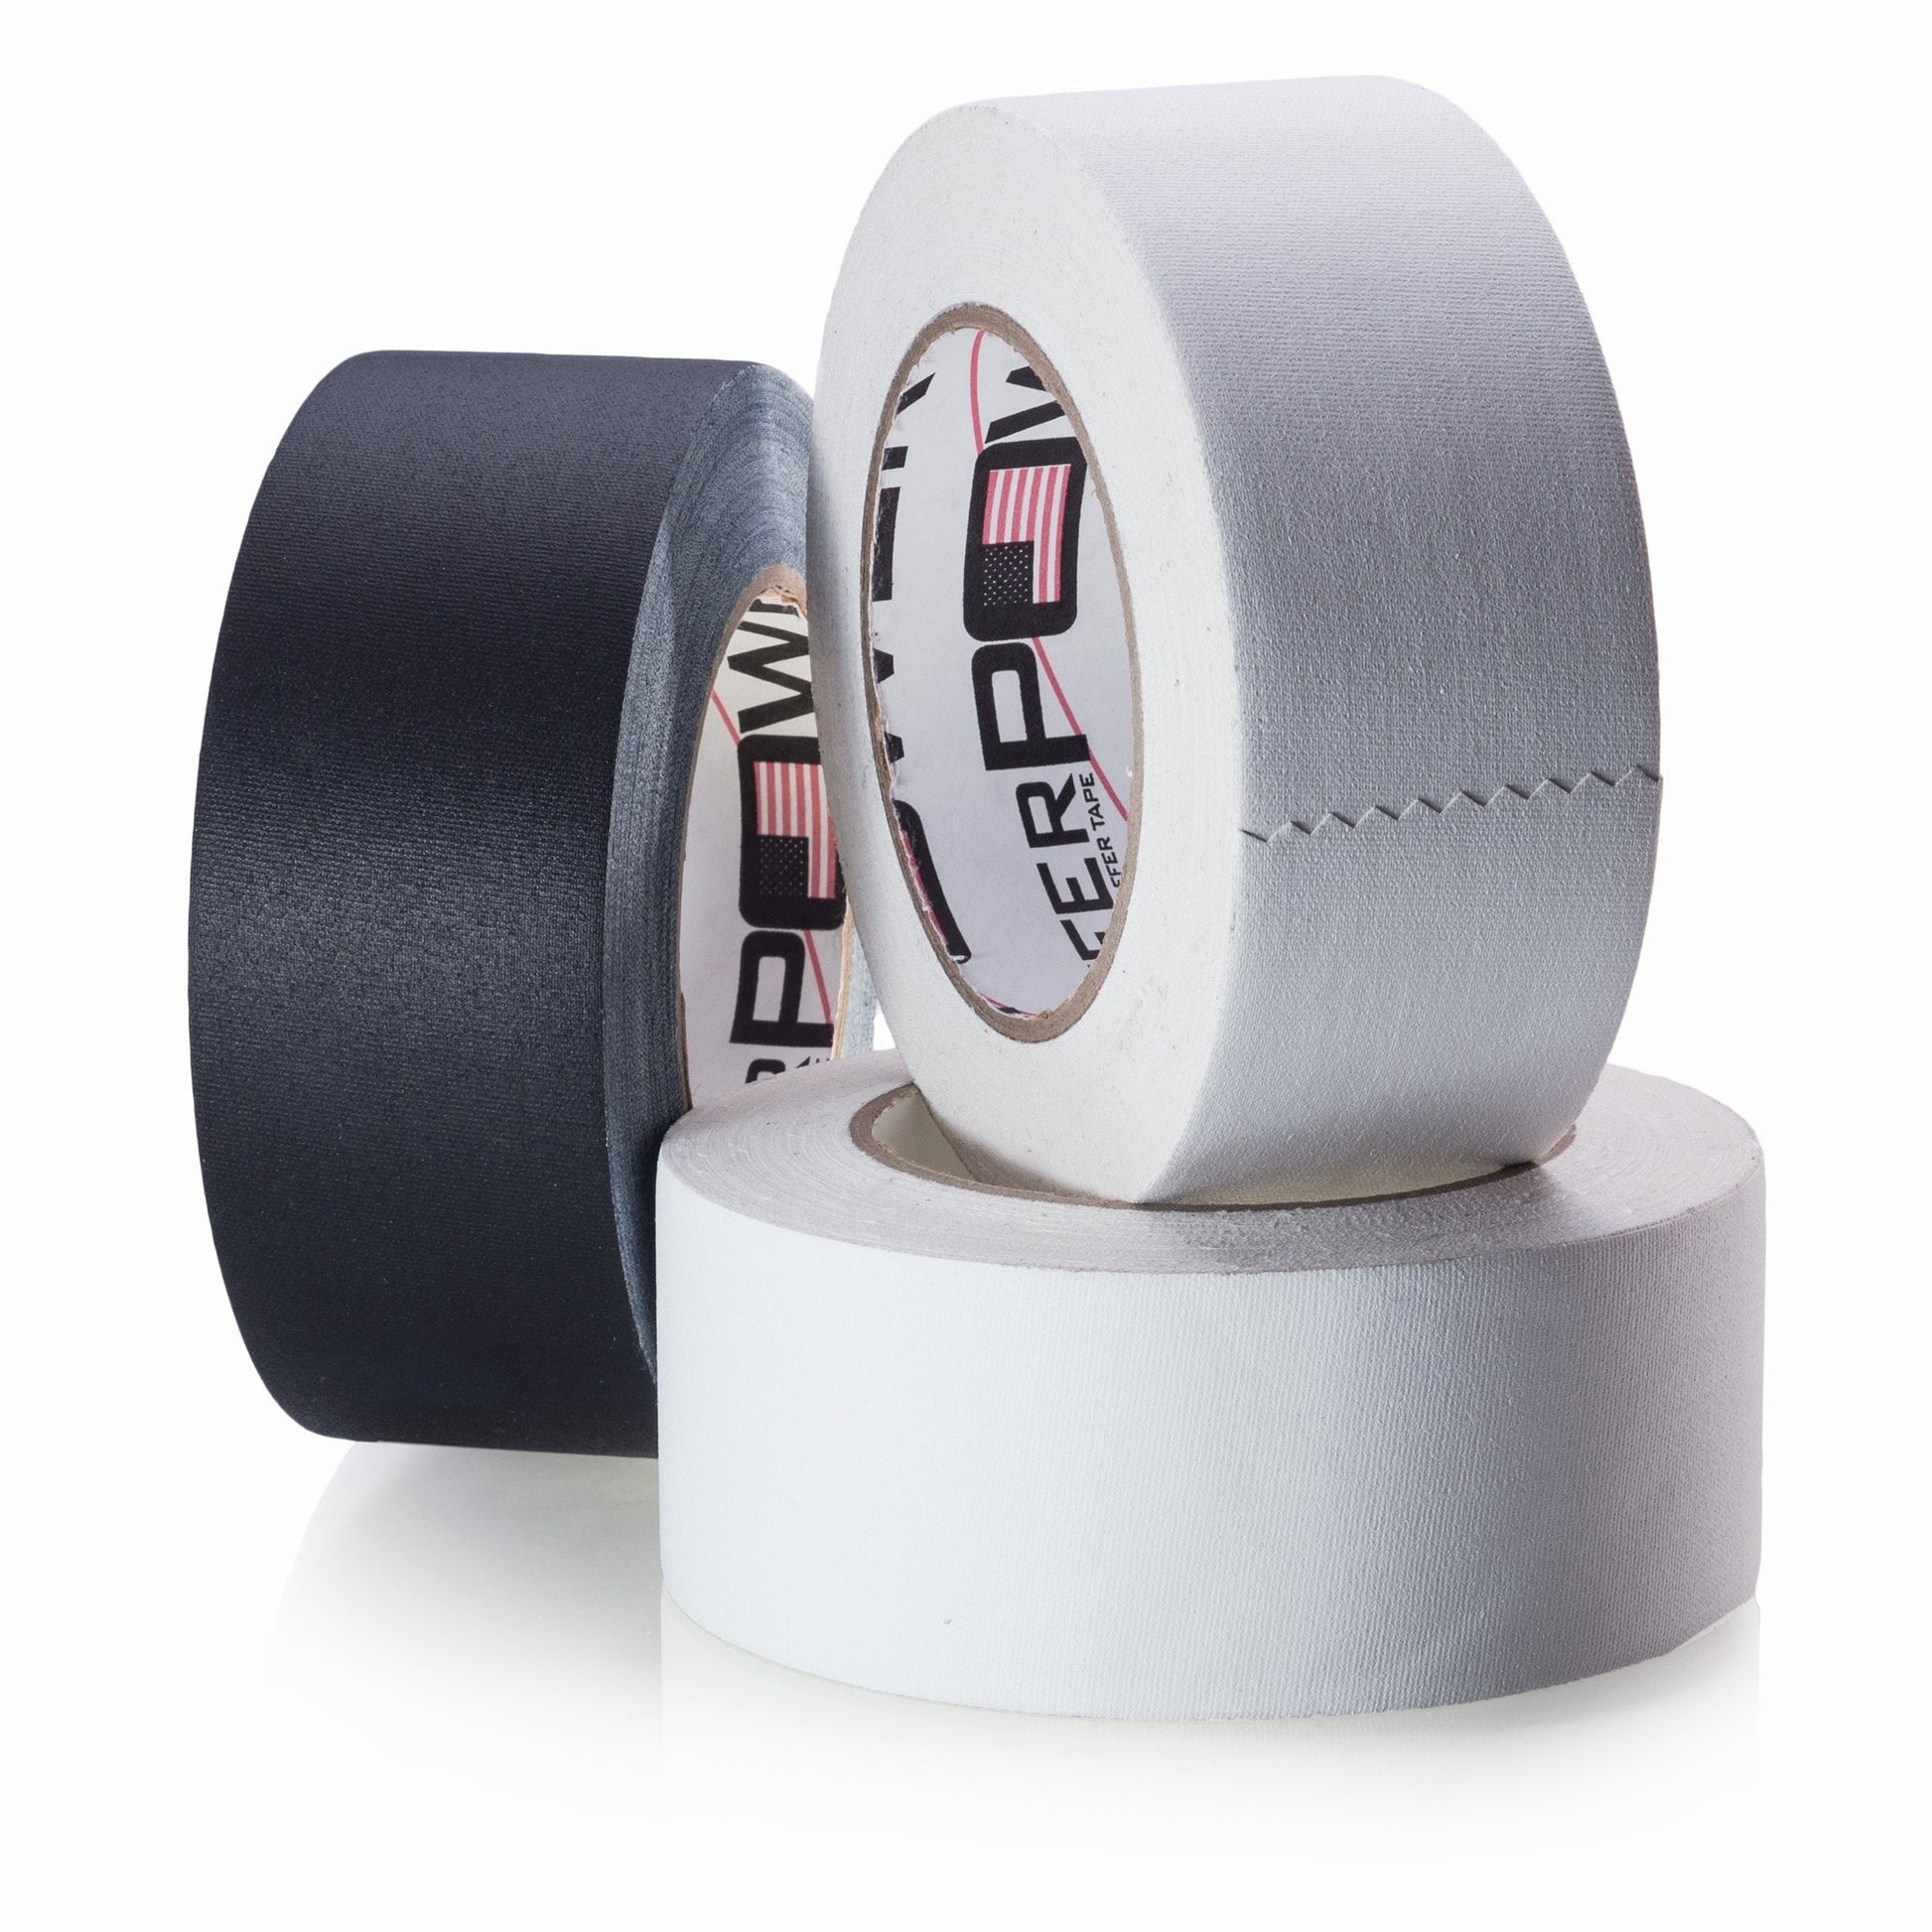 Pro Gaff White Gaffers Tape 2 x 55 yd Roll - Monkey Wrench Productions  Store